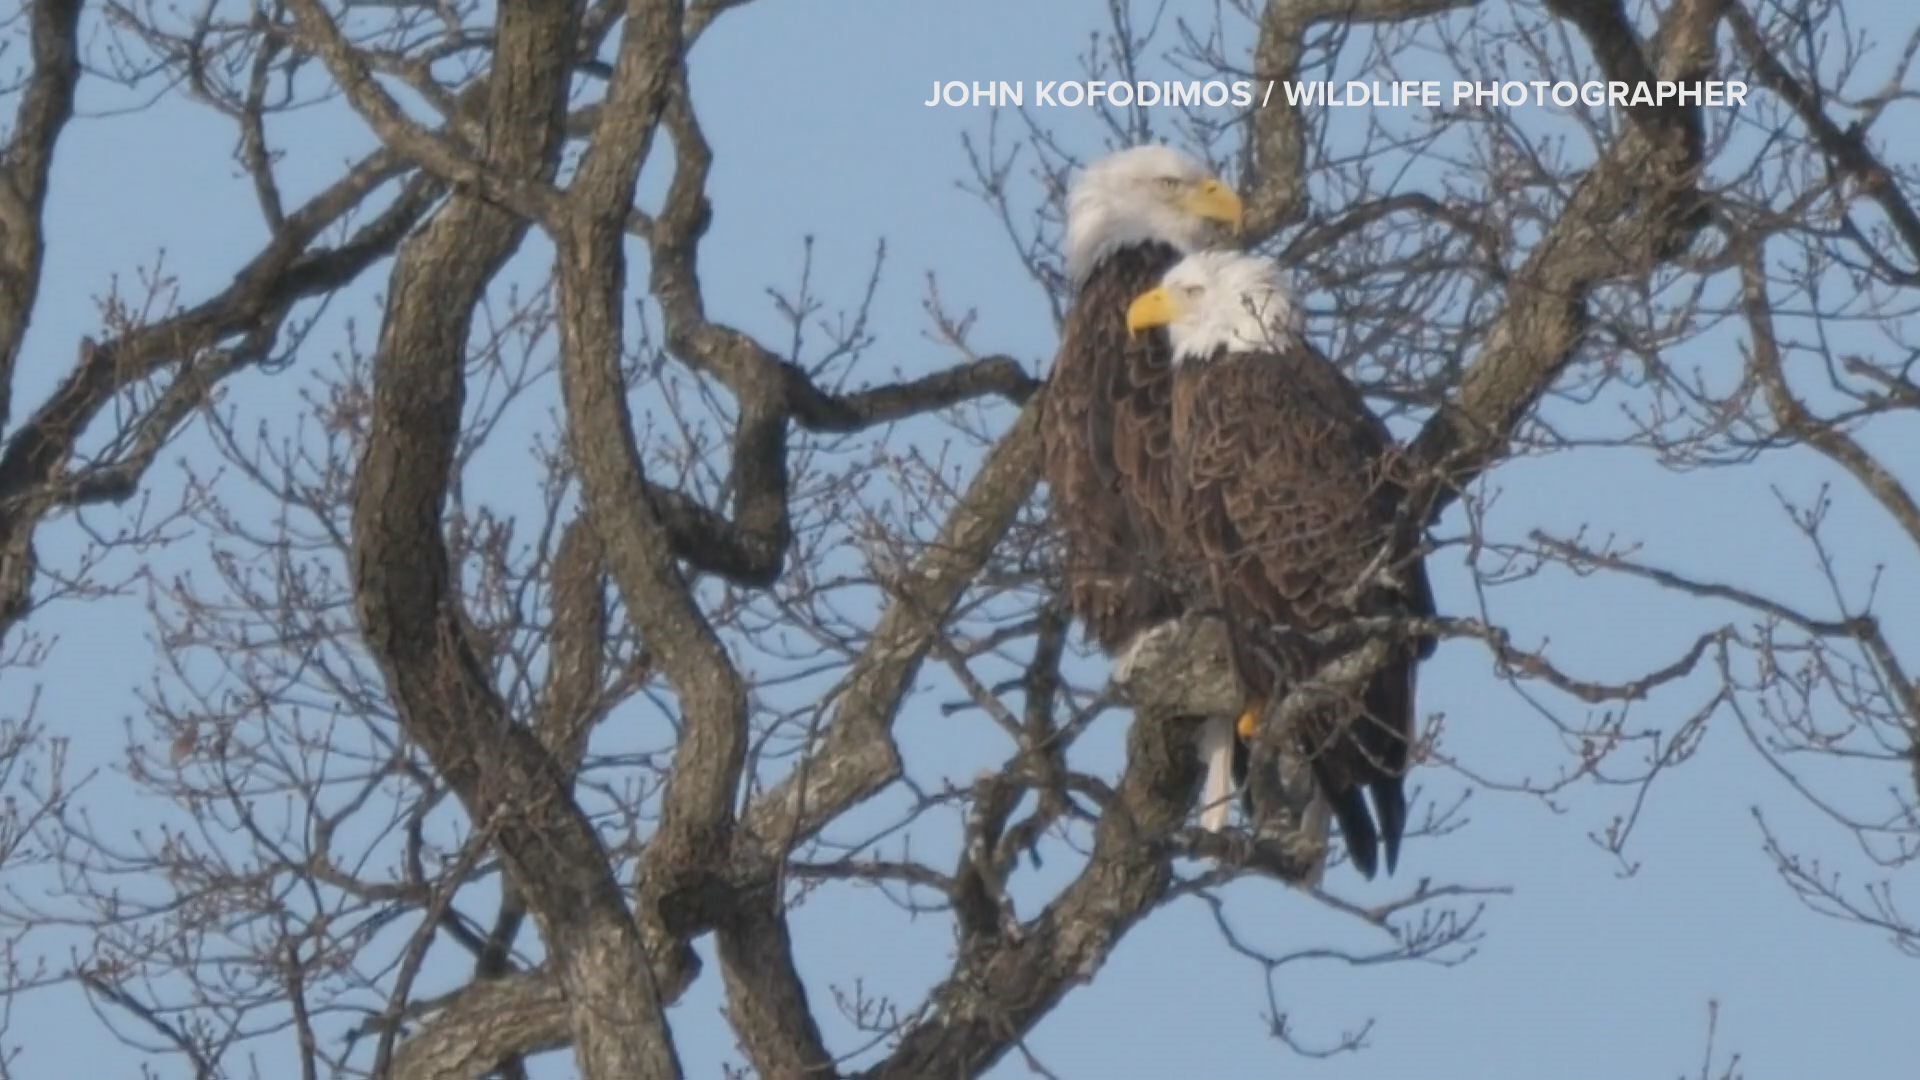 A self-guided tour at Monroe Lake gives visitors the chance to see America's most majestic bird.